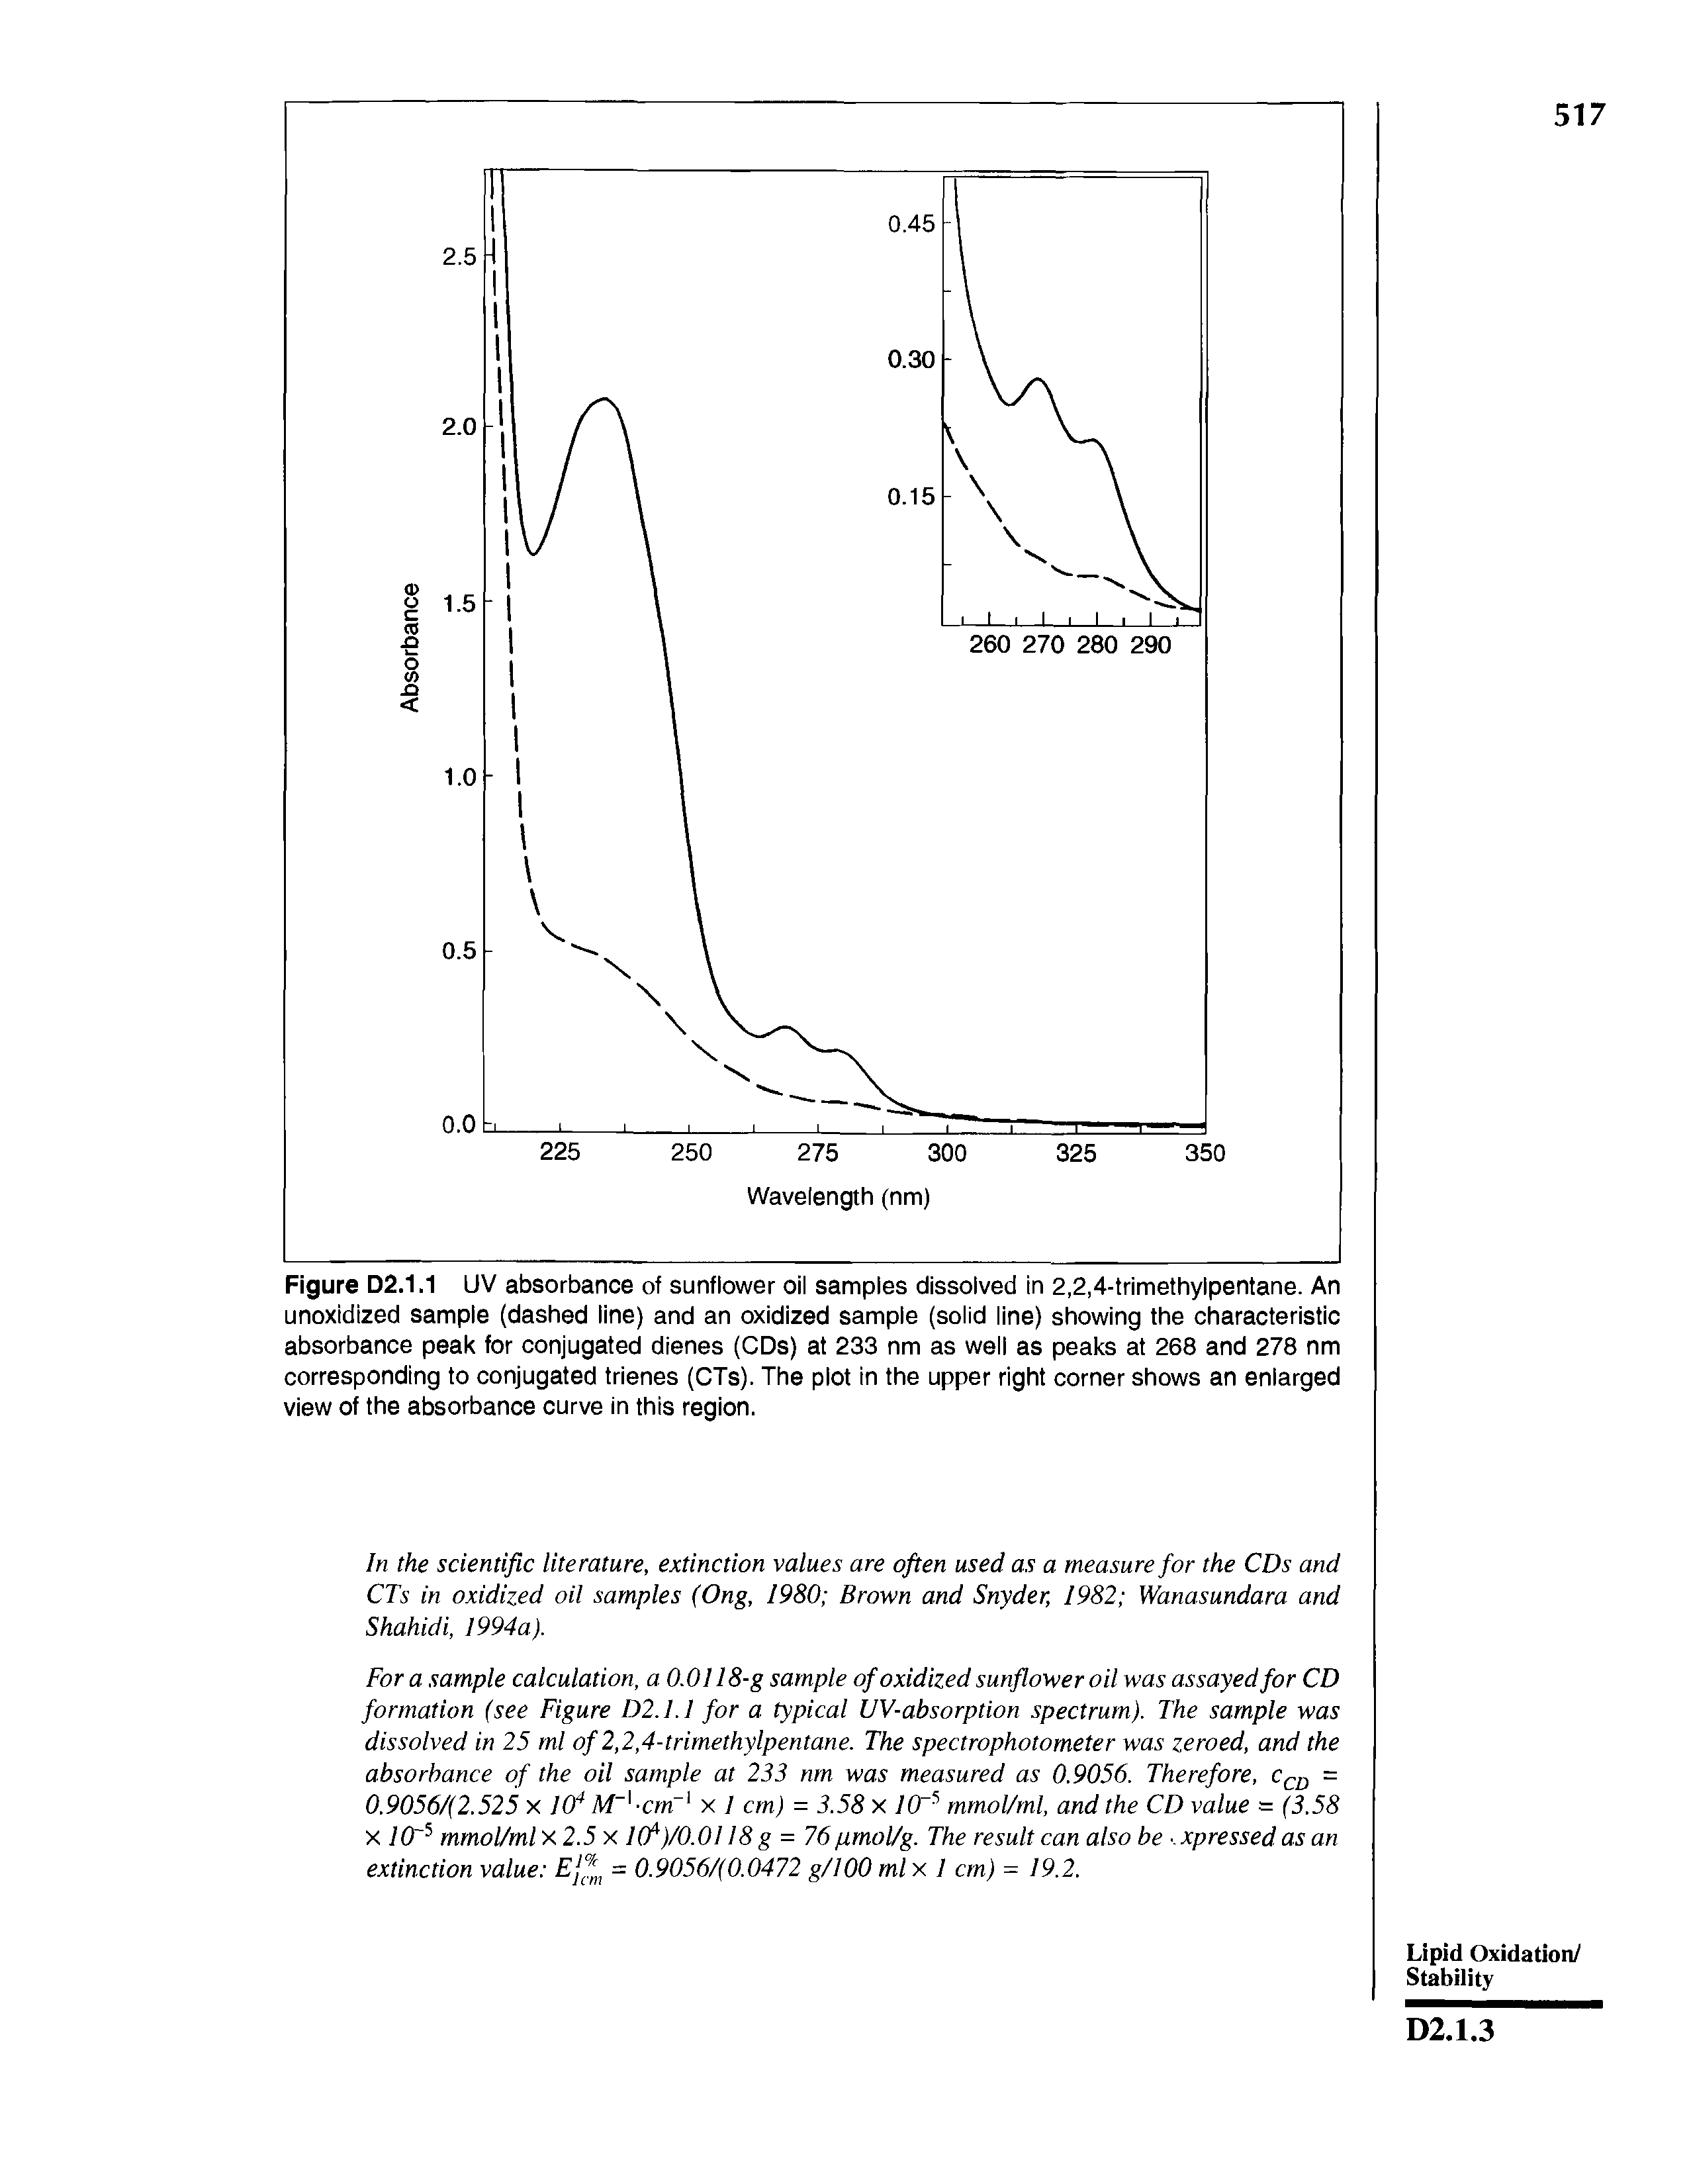 Figure D2.1.1 UV absorbance of sunflower oil samples dissolved in 2,2,4-trimethylpentane. An unoxidized sample (dashed line) and an oxidized sample (solid line) showing the characteristic absorbance peak for conjugated dienes (CDs) at 233 nm as well as peaks at 268 and 278 nm corresponding to conjugated trienes (CTs). The plot in the upper right corner shows an enlarged view of the absorbance curve in this region.